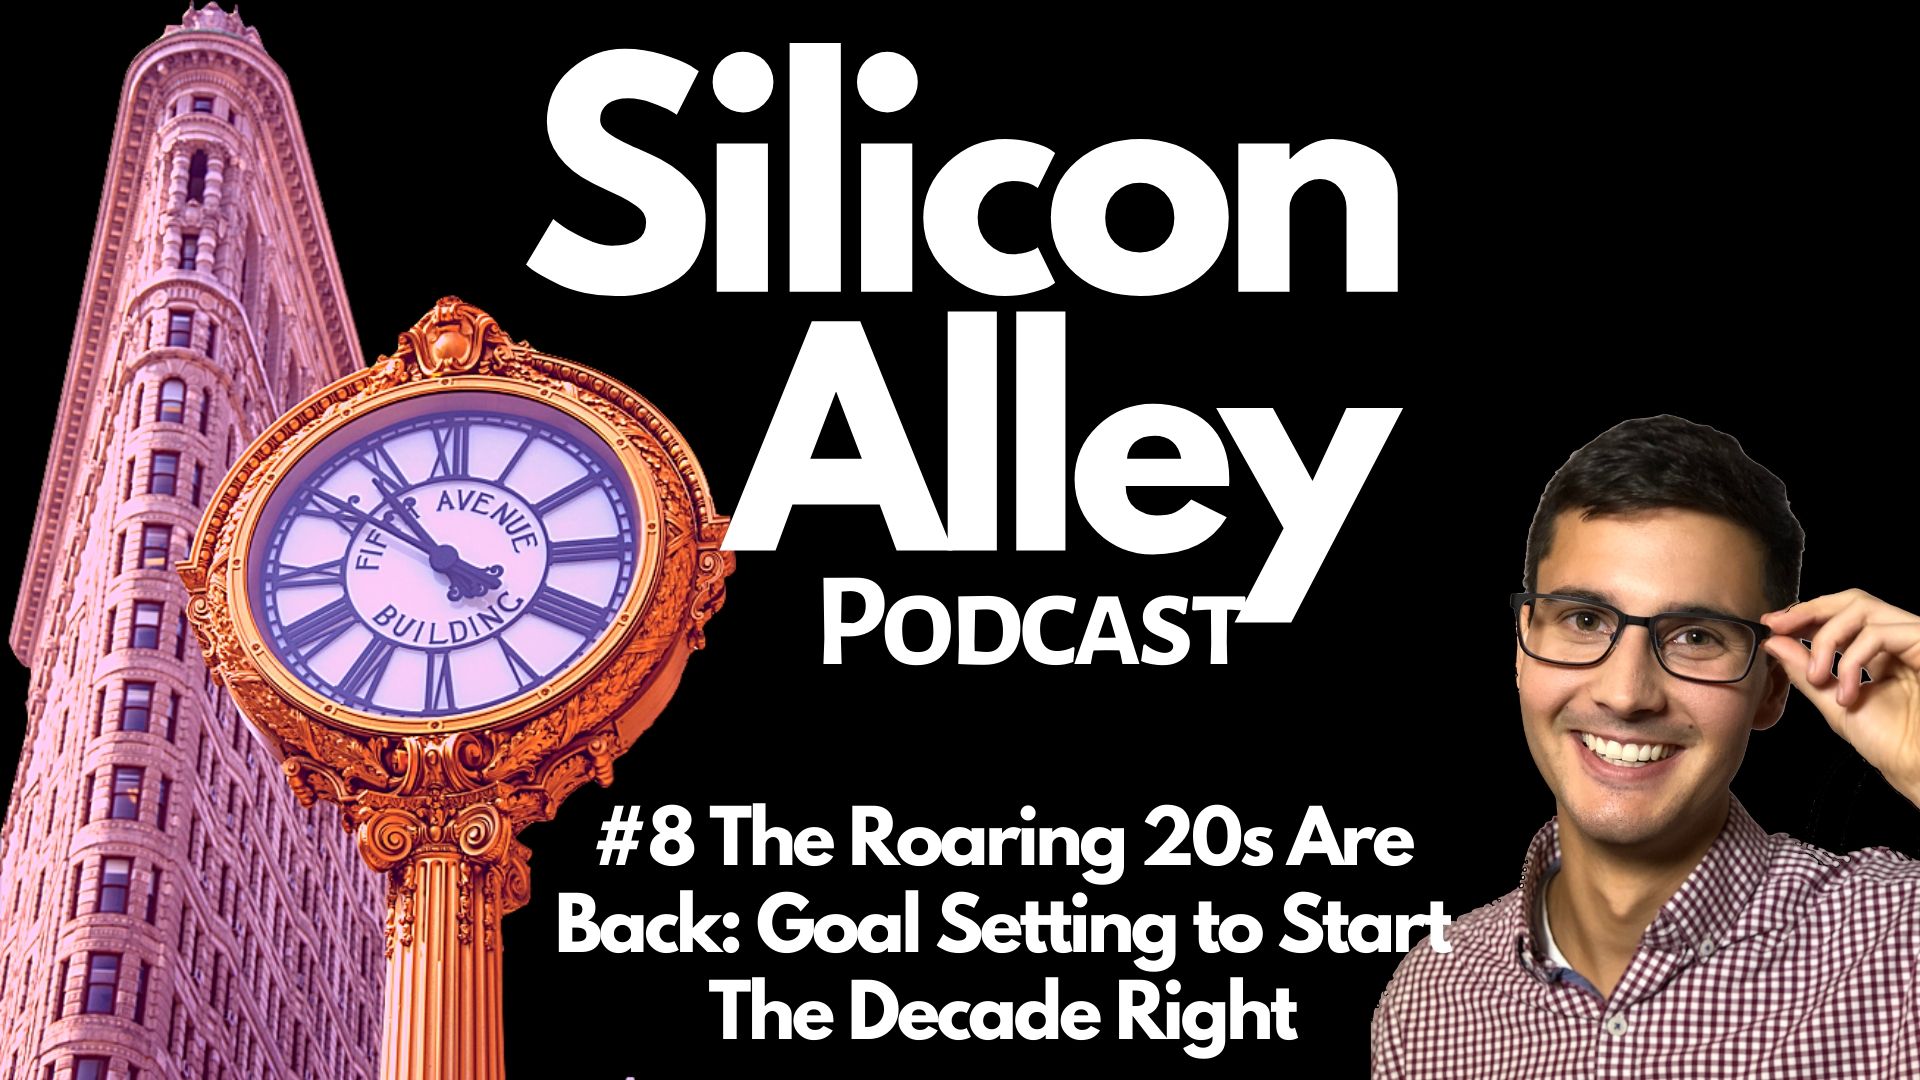 The Roaring 20s Are Back- Goal Setting to Start The Decade Right with William Glass Silicon Alley Podcast